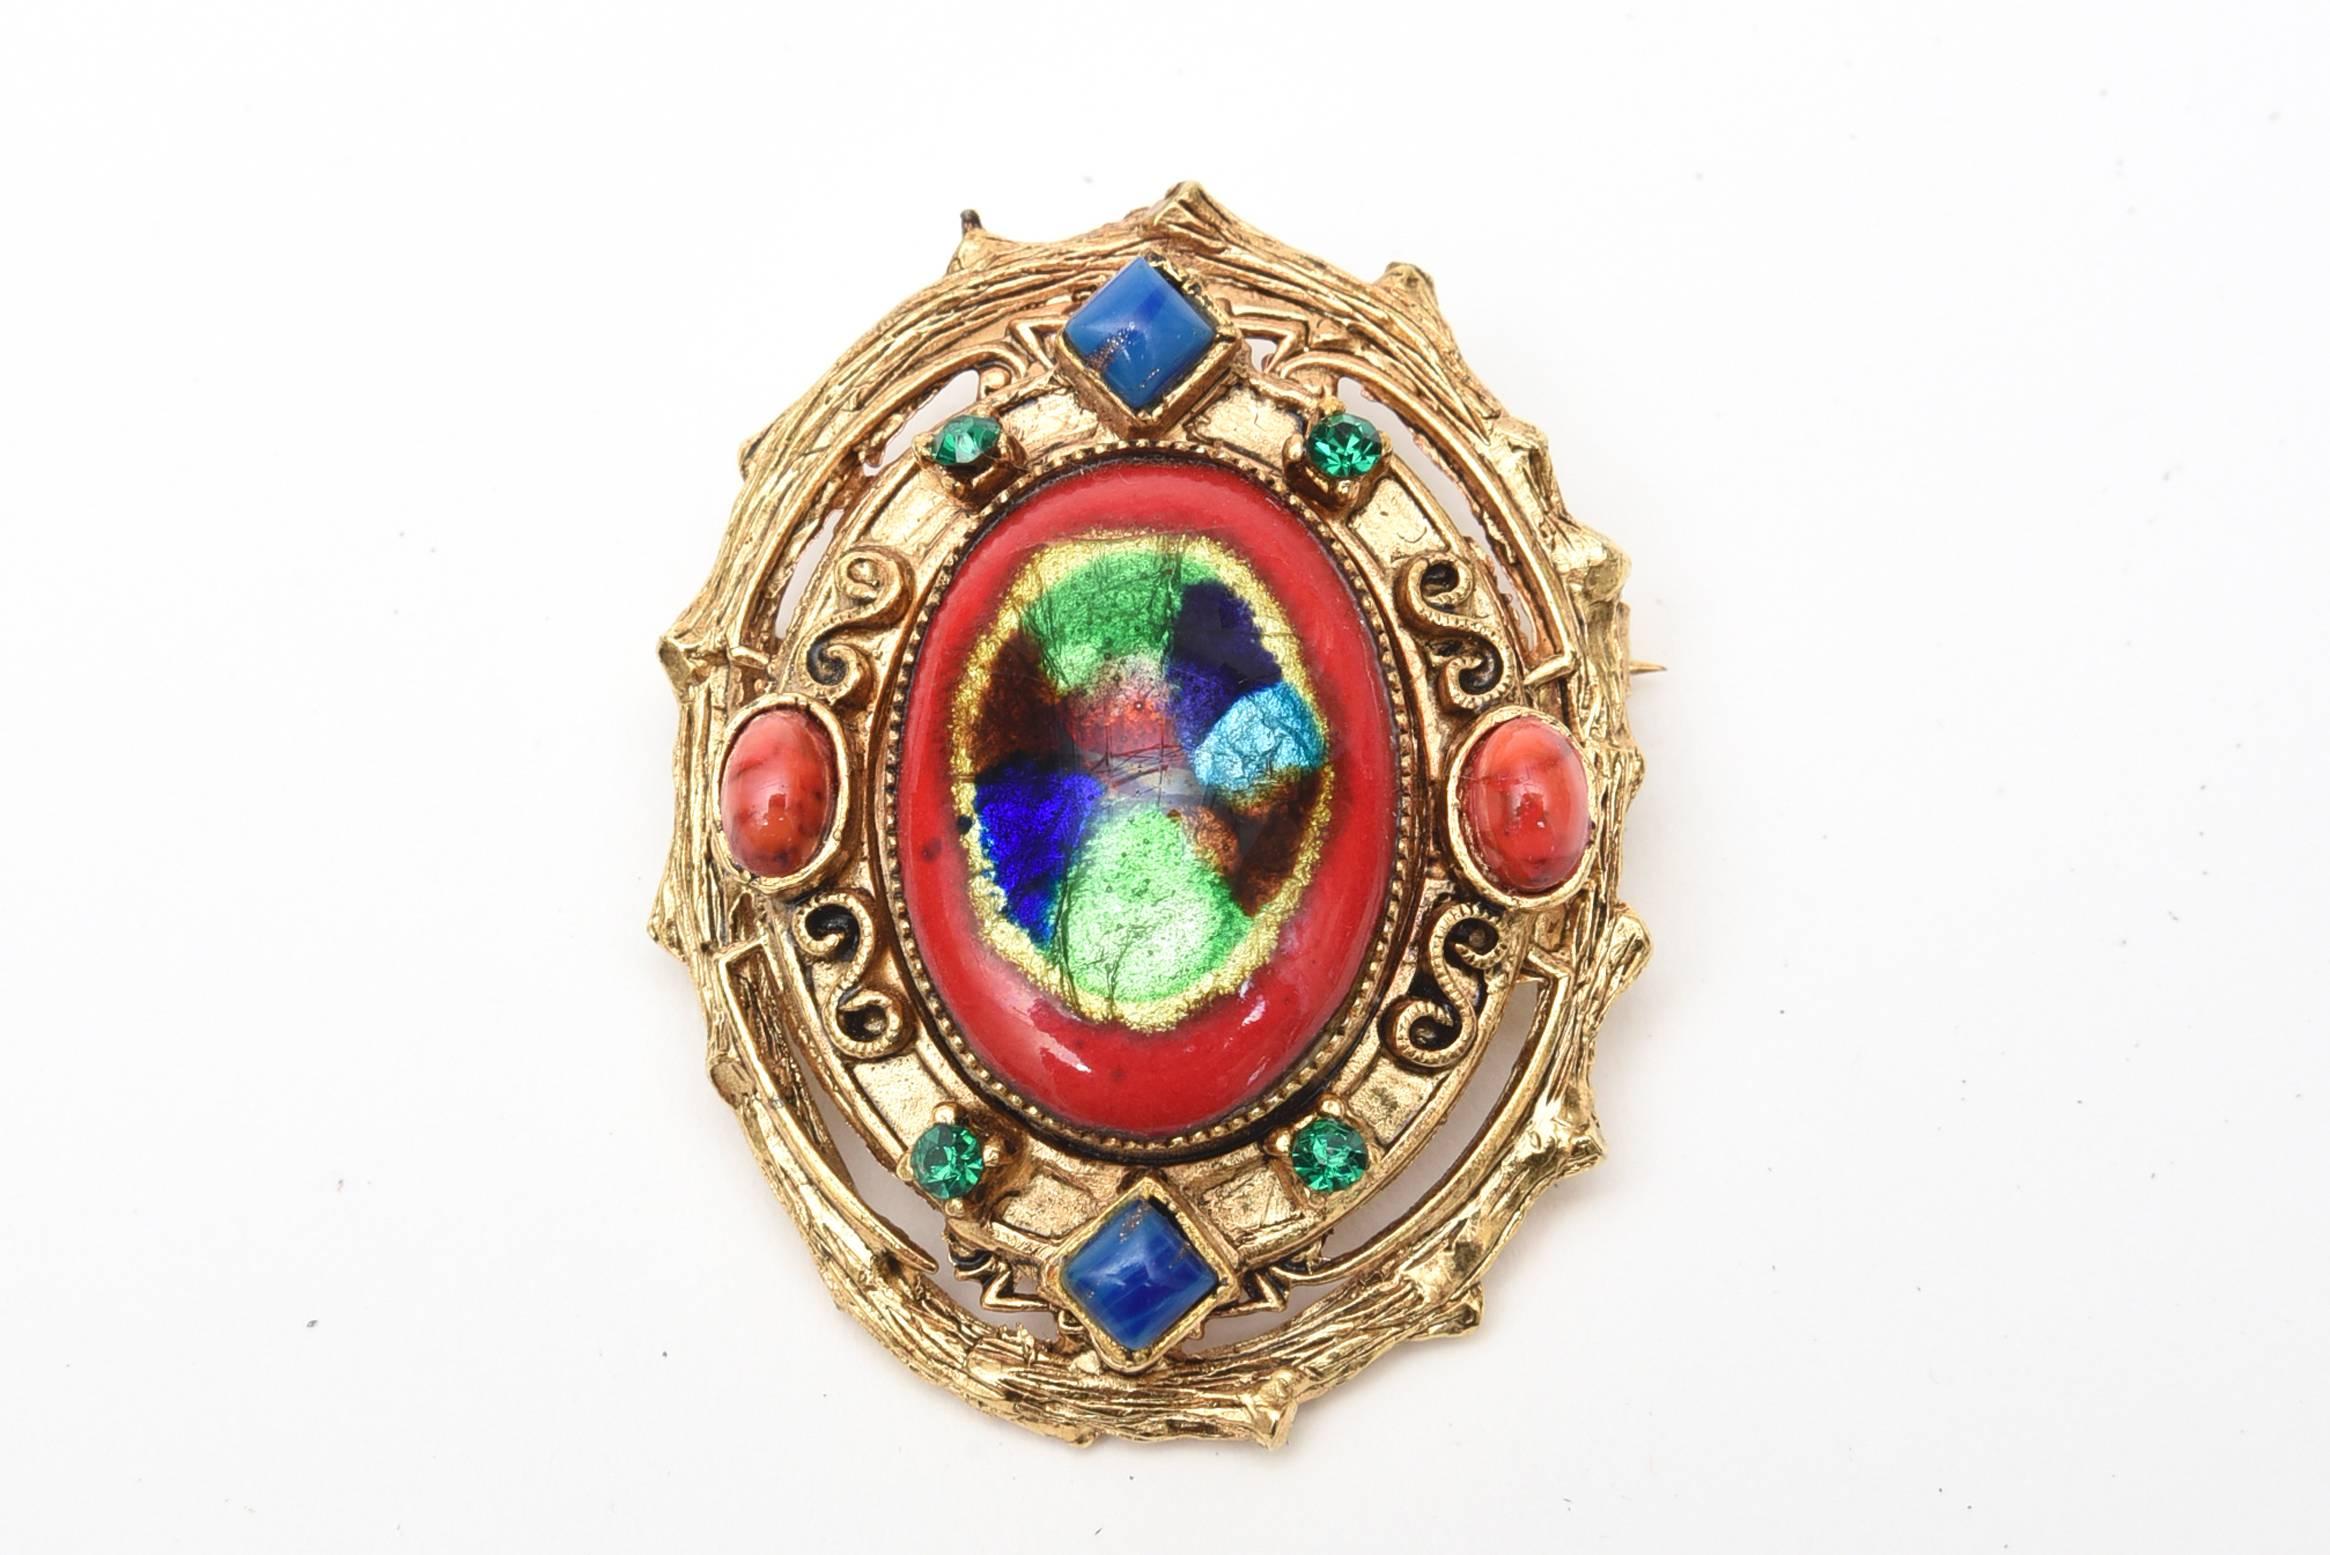 This vintage set of signed Hattie Carnegie enamel clip on earrings and small pin and or pendant is reminiscent of a bygone era of Elizabethan meets byzantine influence. The colors are rich, vibrant and exquisite as are all the details and